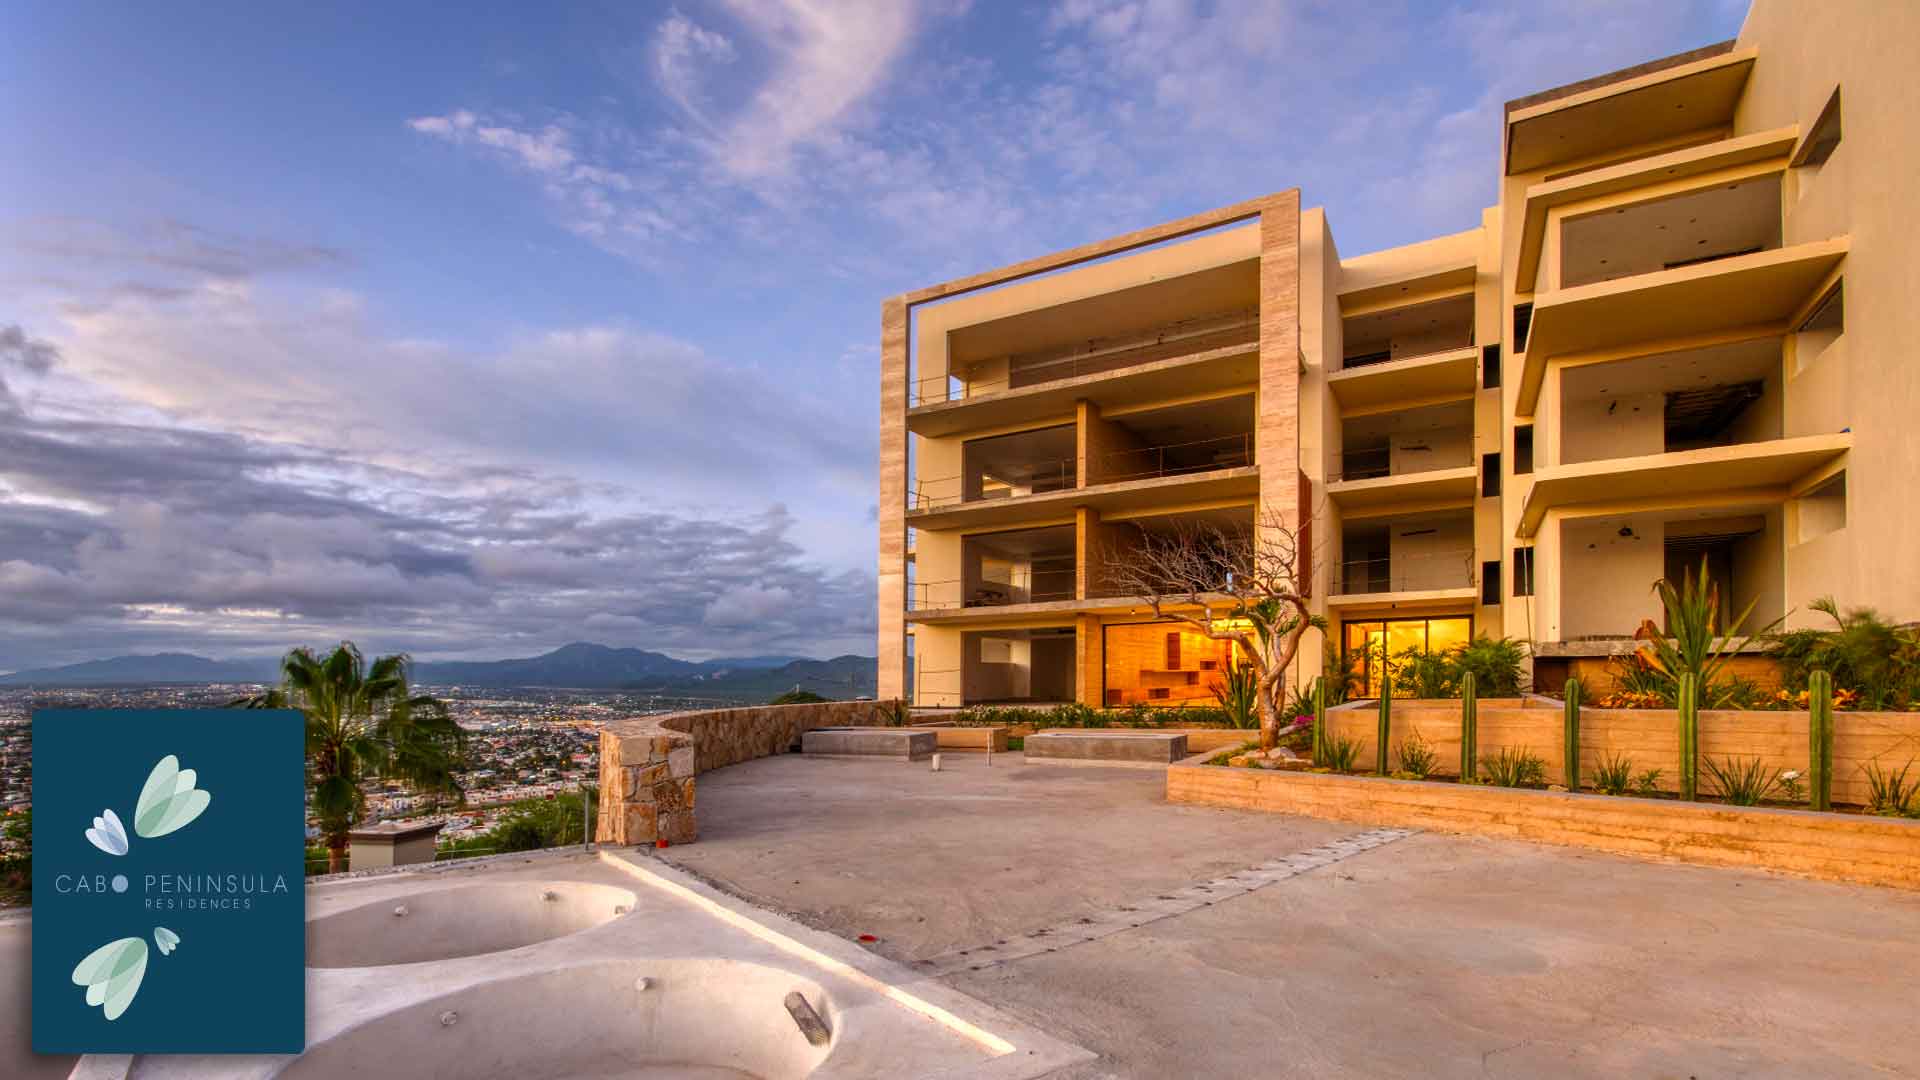 Condos for sale in cabo